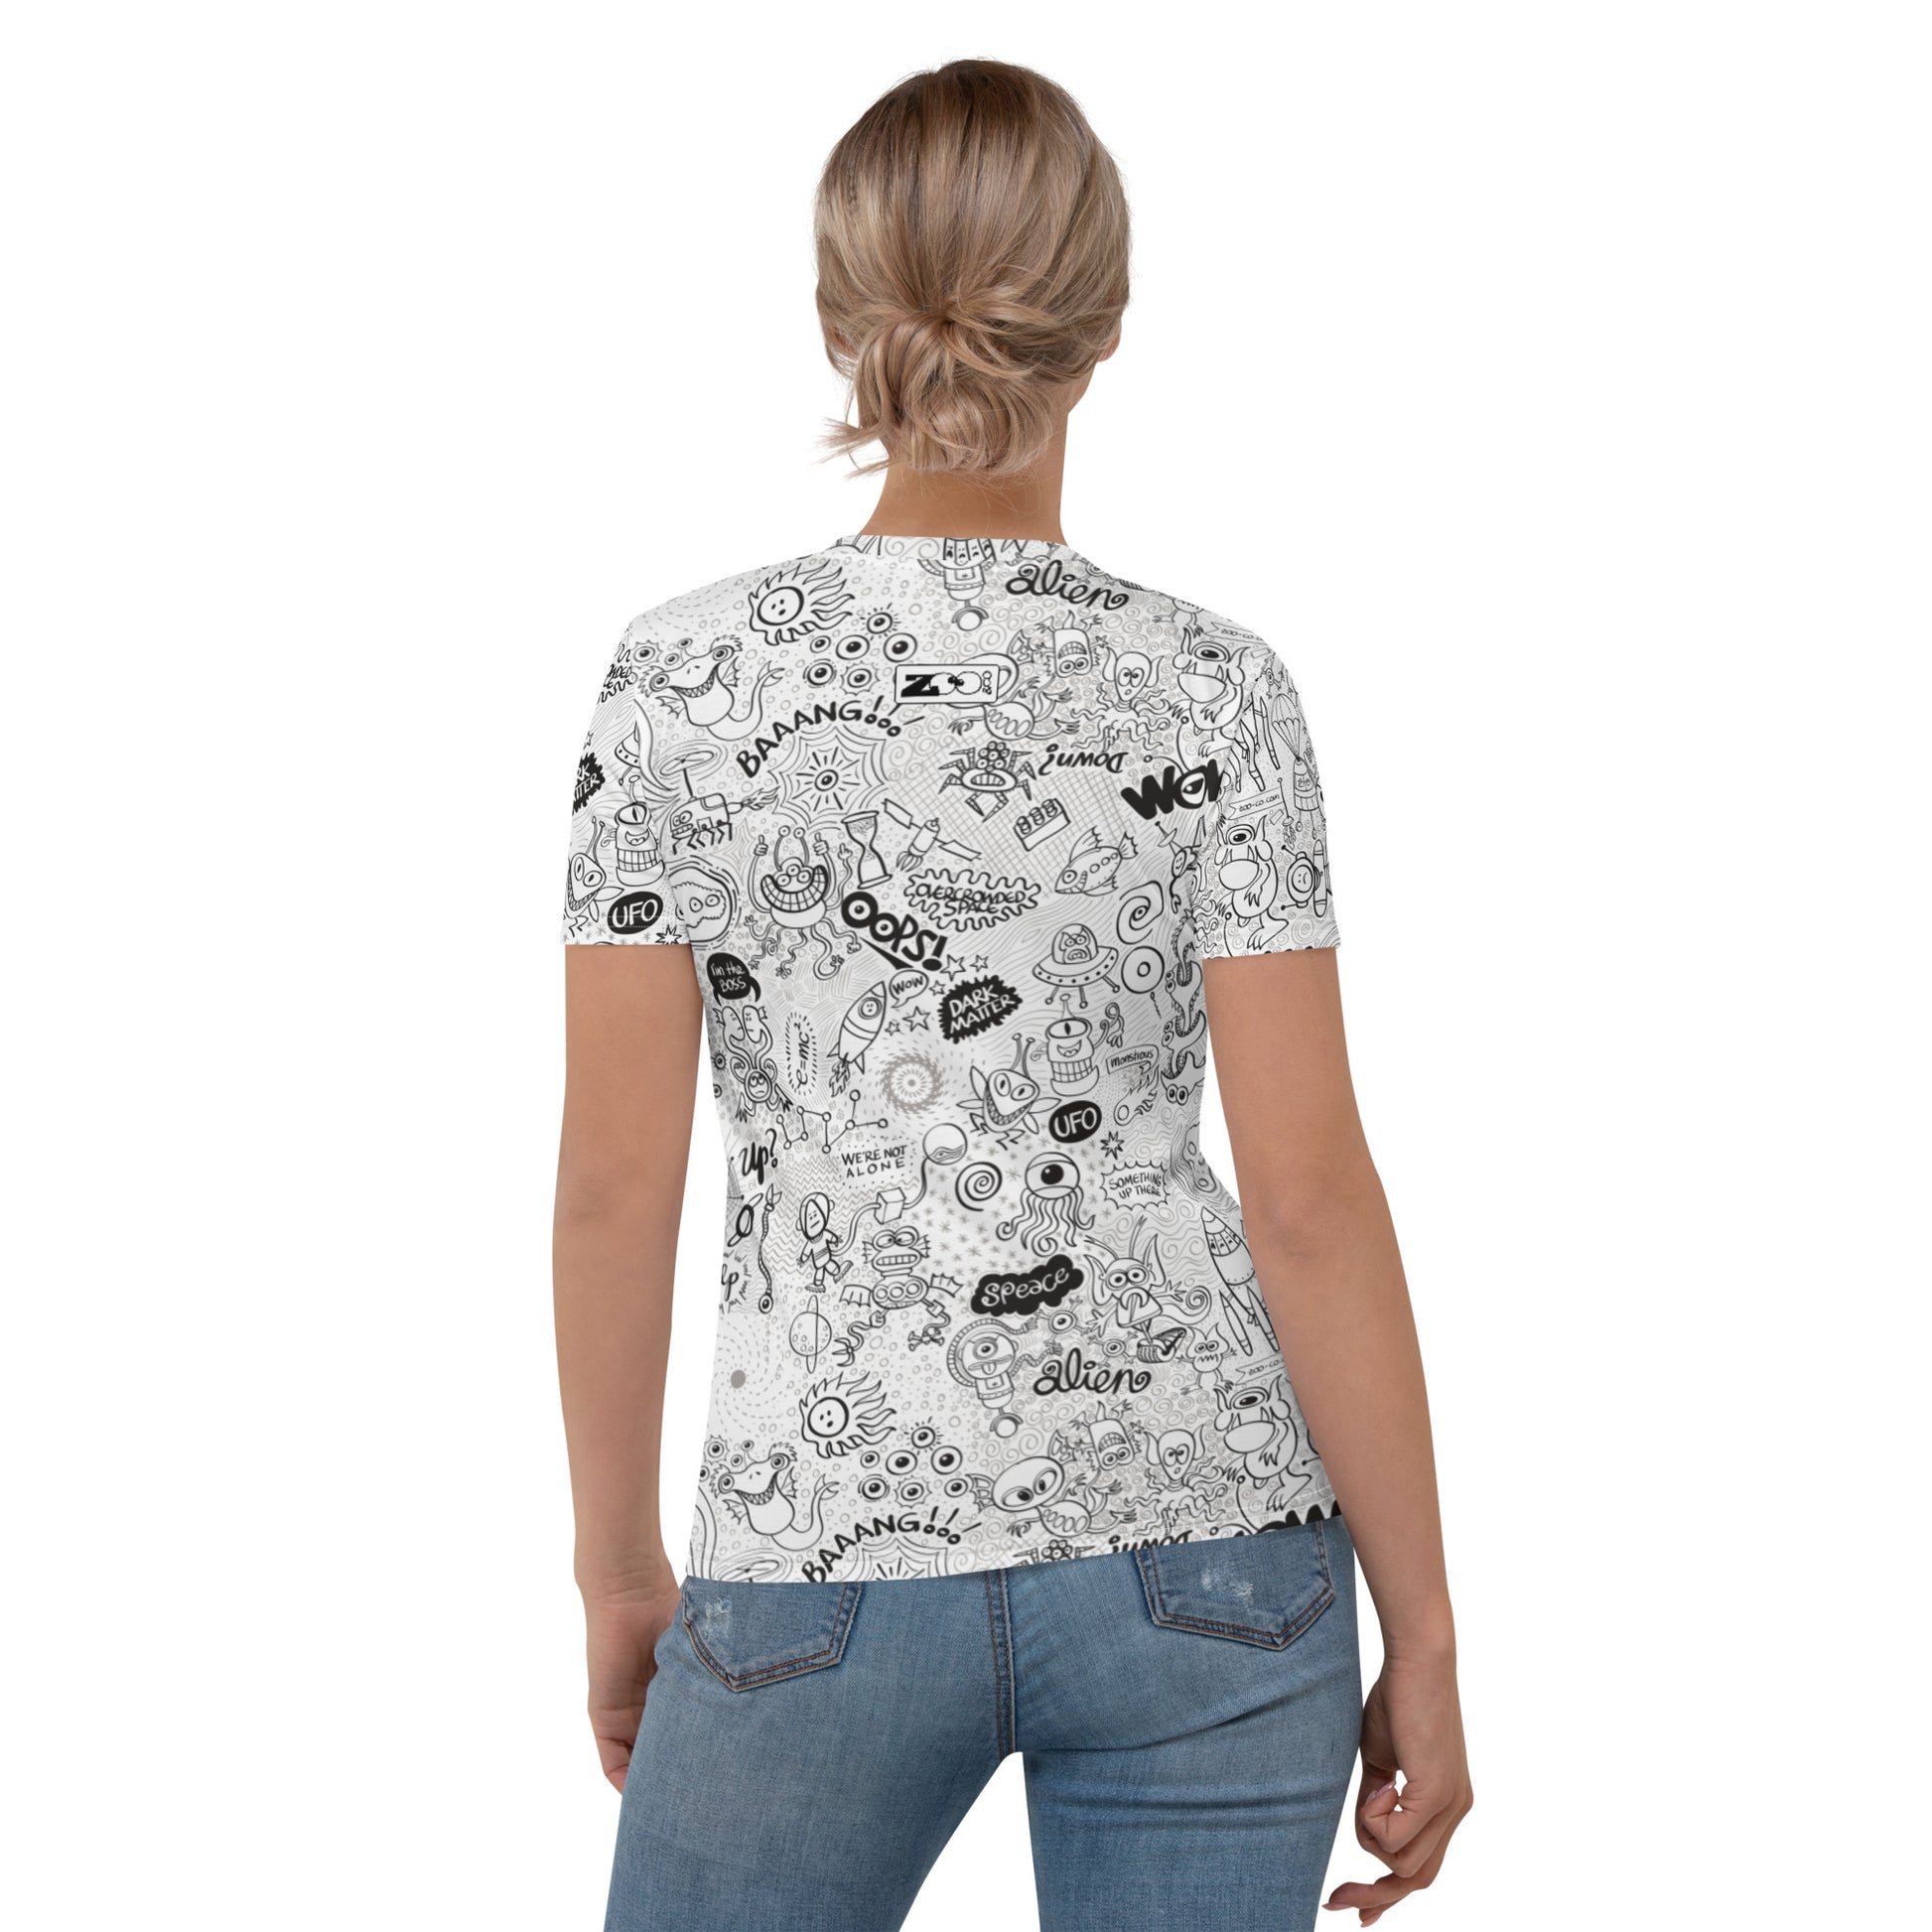 Celebrating the most comprehensive Doodle art of the universe Women's T-shirt. Back view